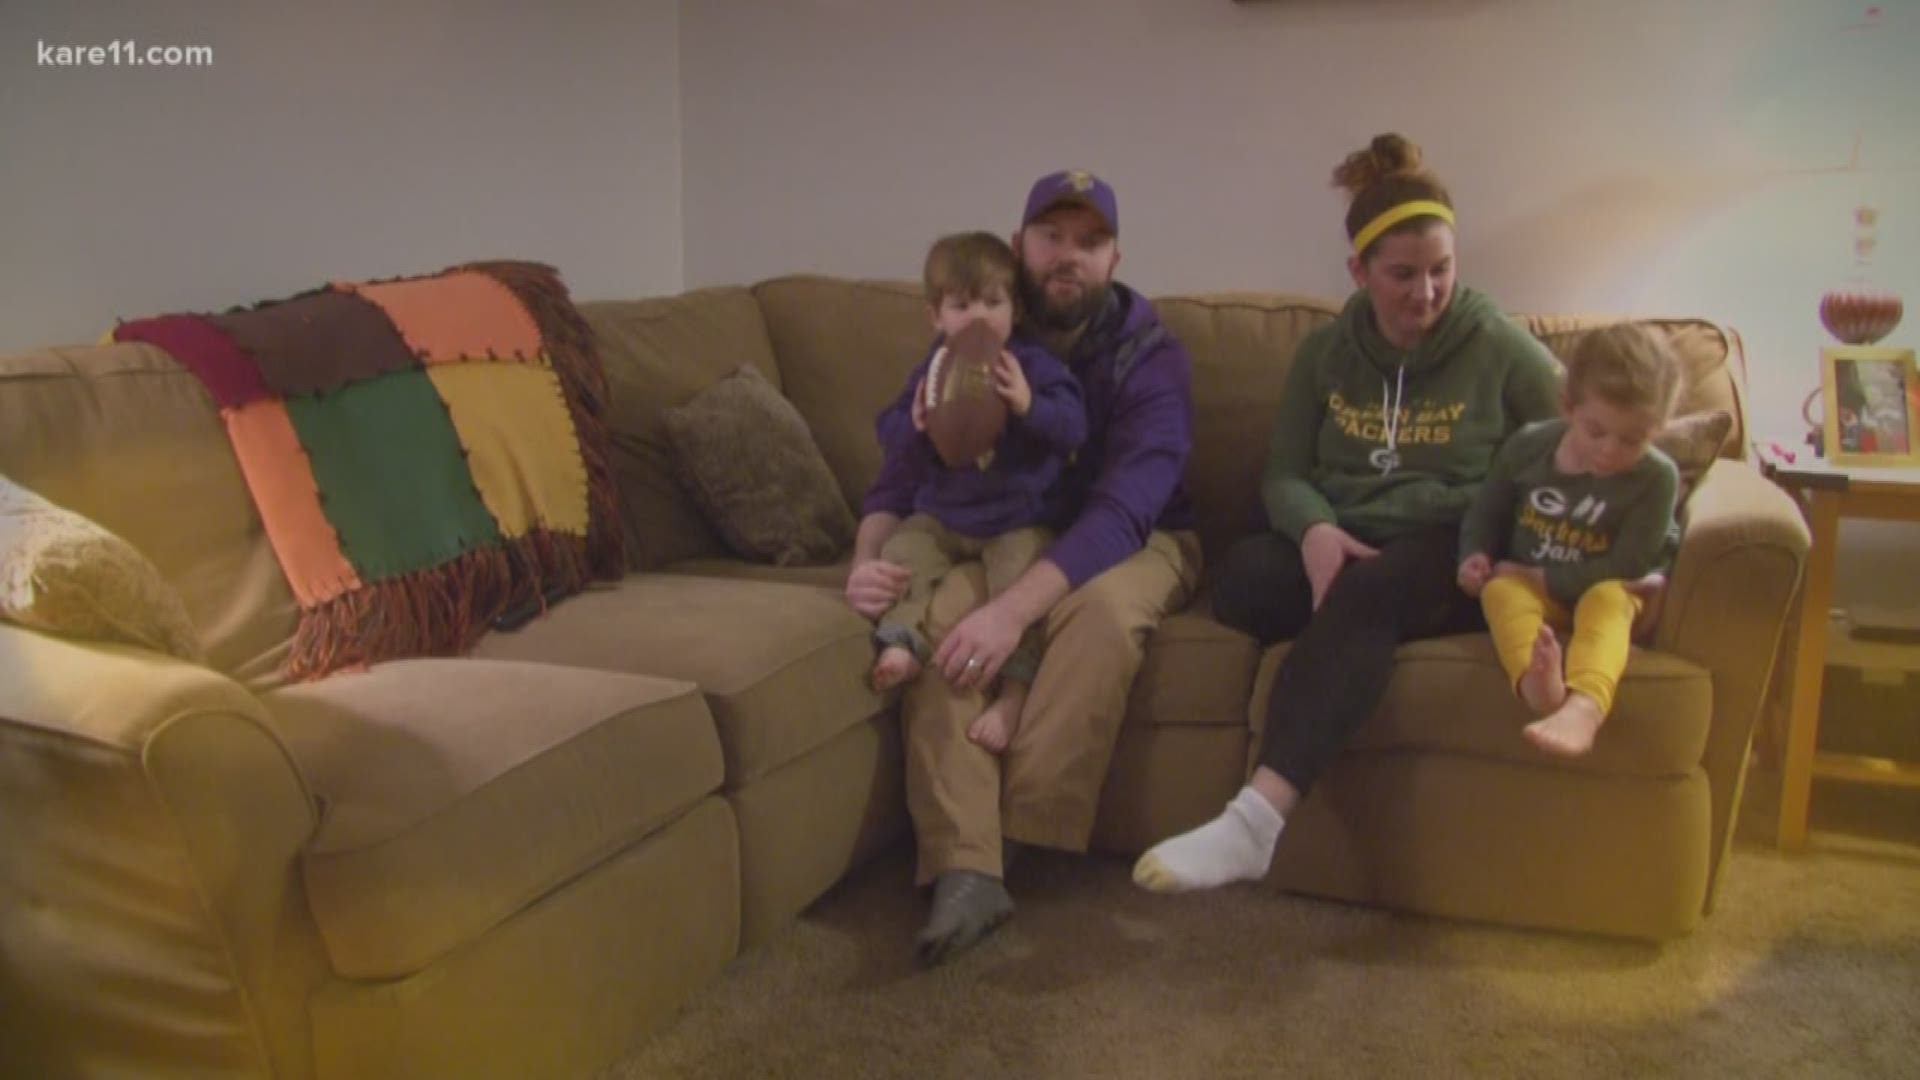 Will Ganje is a diehard Vikings fan, while his wife Dani bleeds green and gold for the Packers. So, as you can imagine, it's a pretty interesting family dynamic when the two rivals face off. https://kare11.tv/2r7lkrw